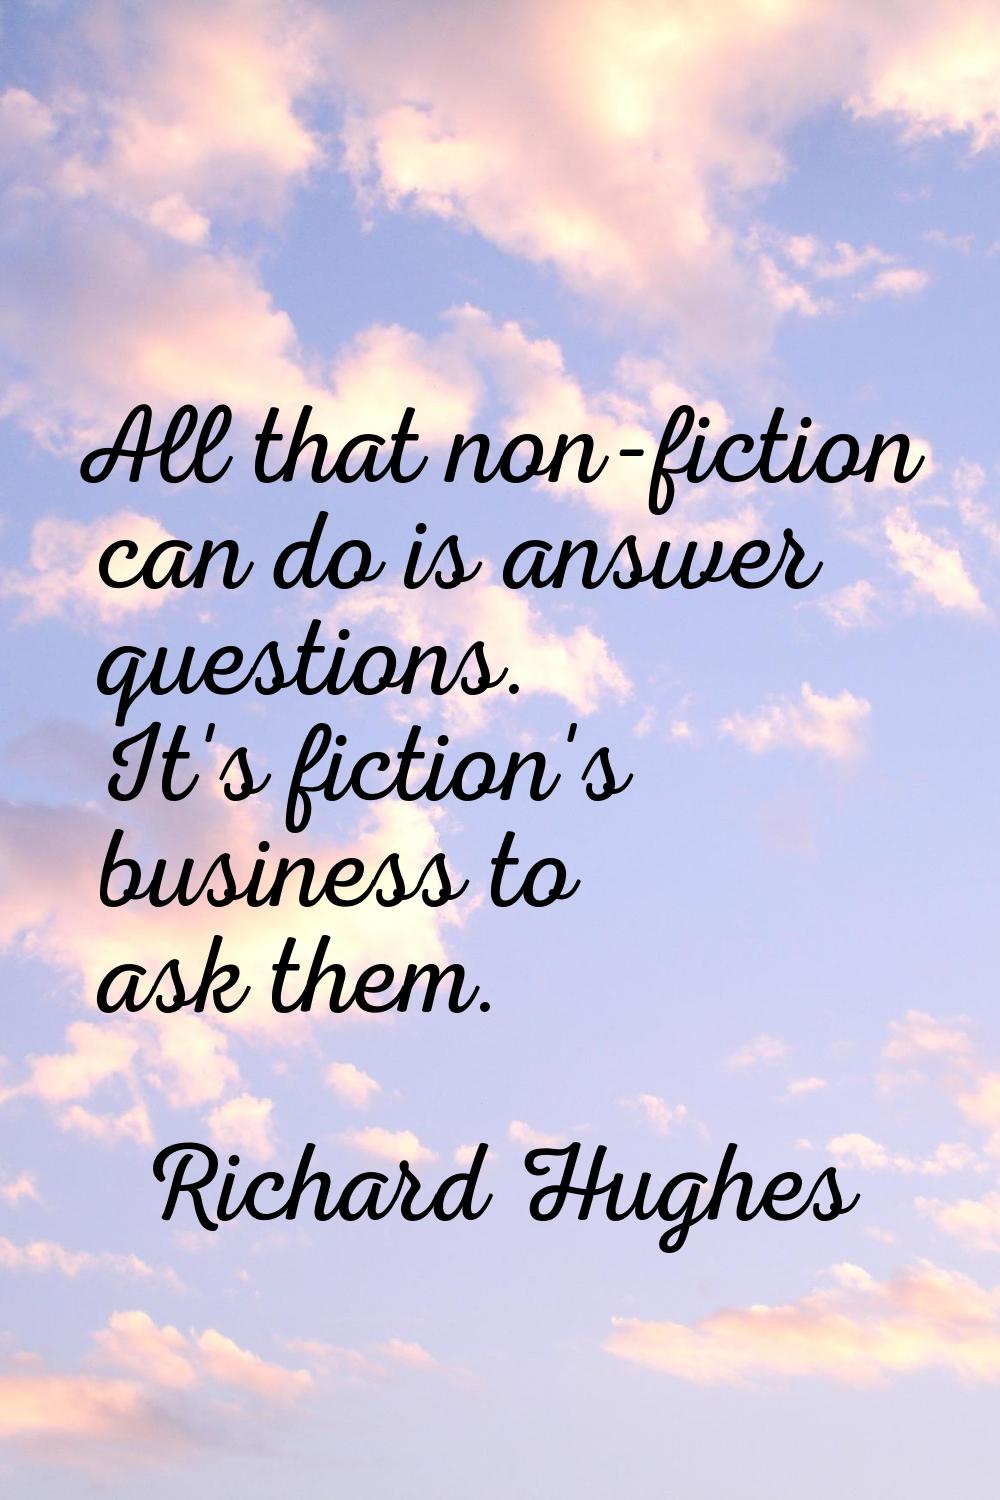 All that non-fiction can do is answer questions. It's fiction's business to ask them.